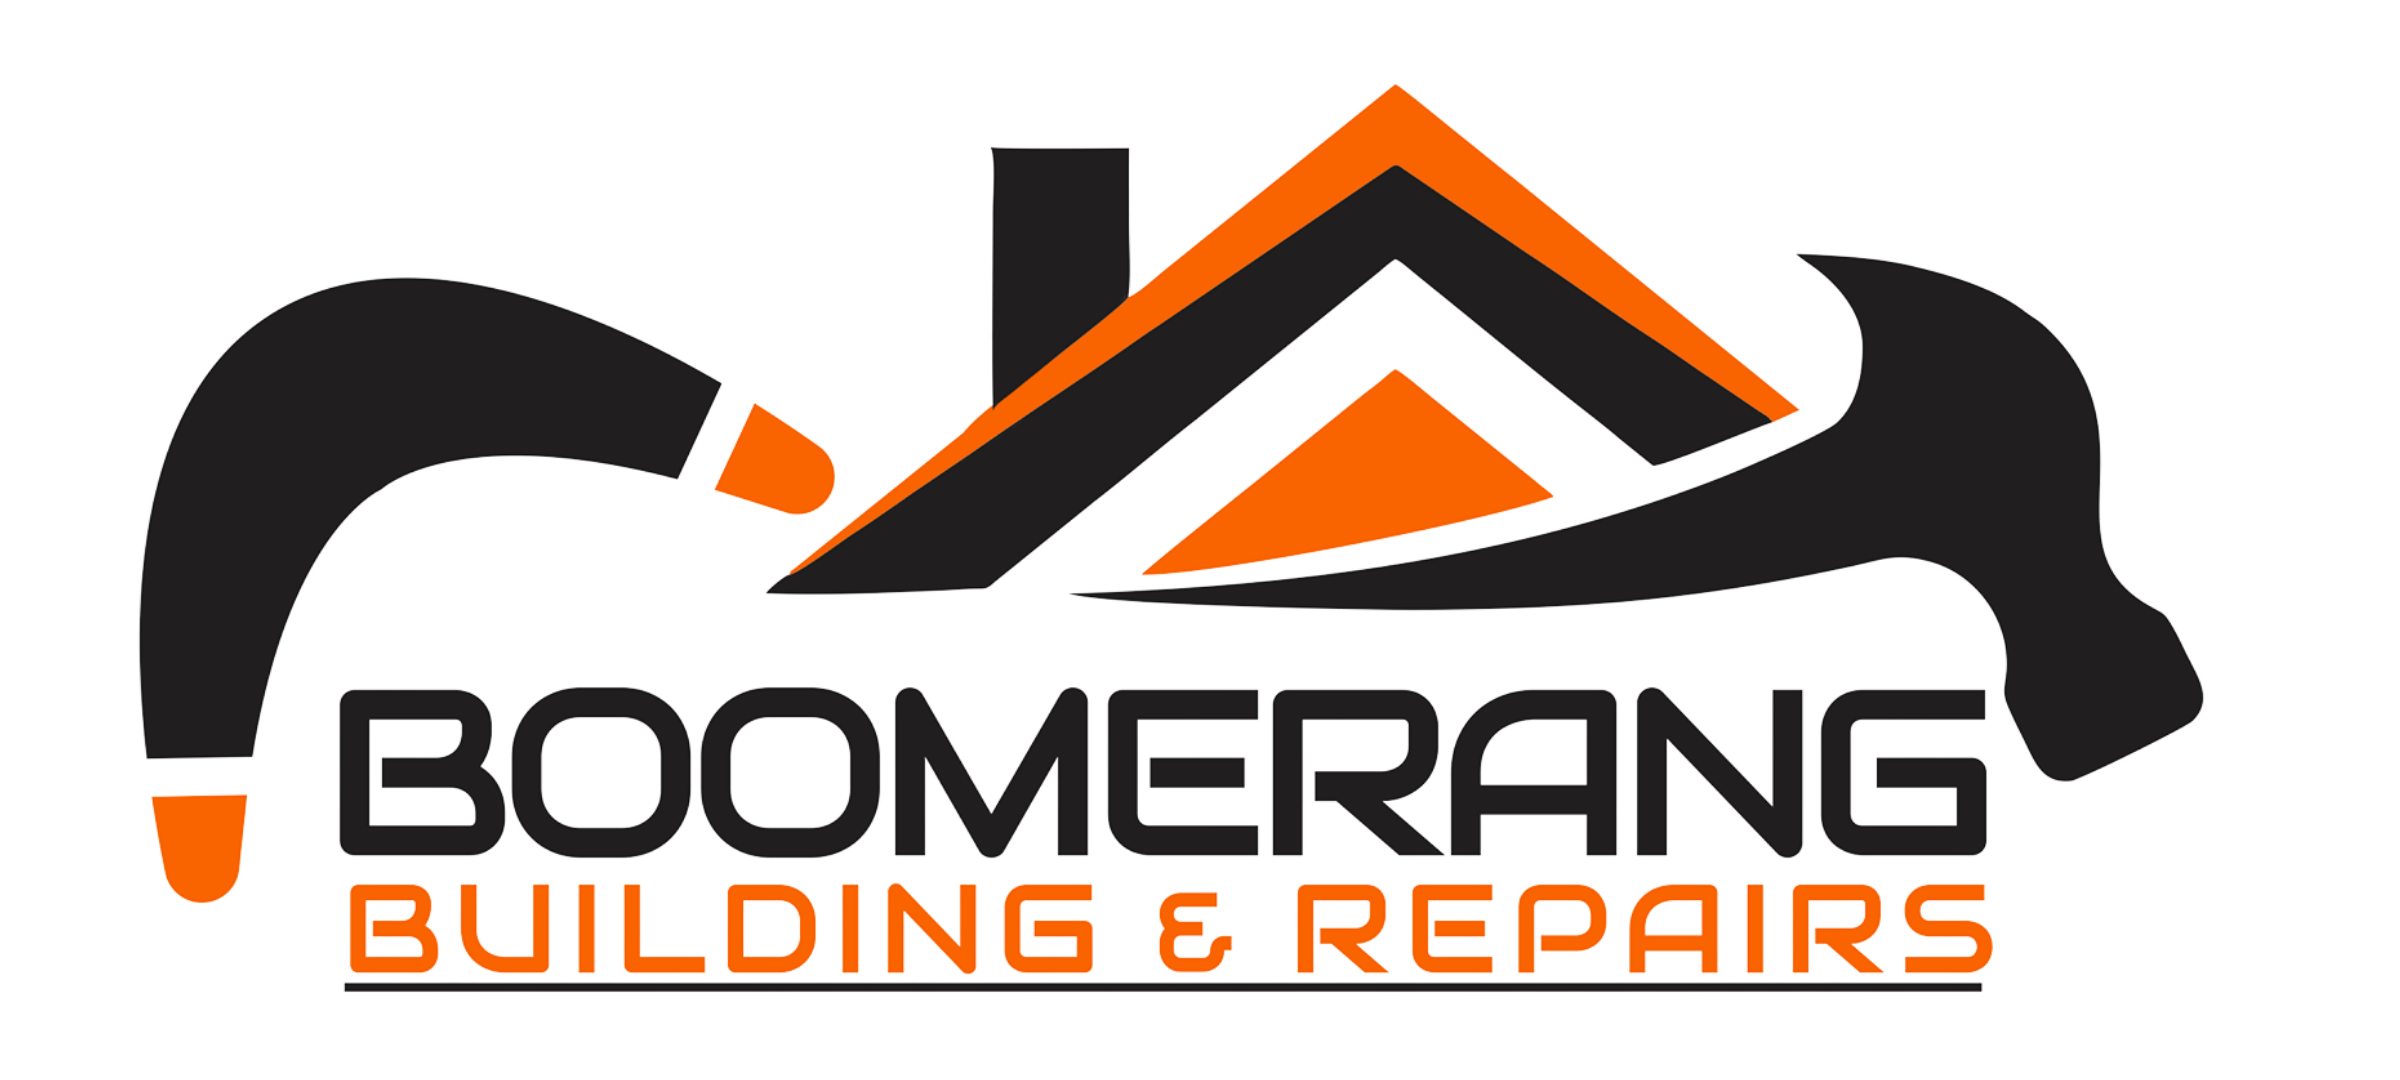 Boomerang Building & Repairs Explains what Makes Them the Leading Roofing Company